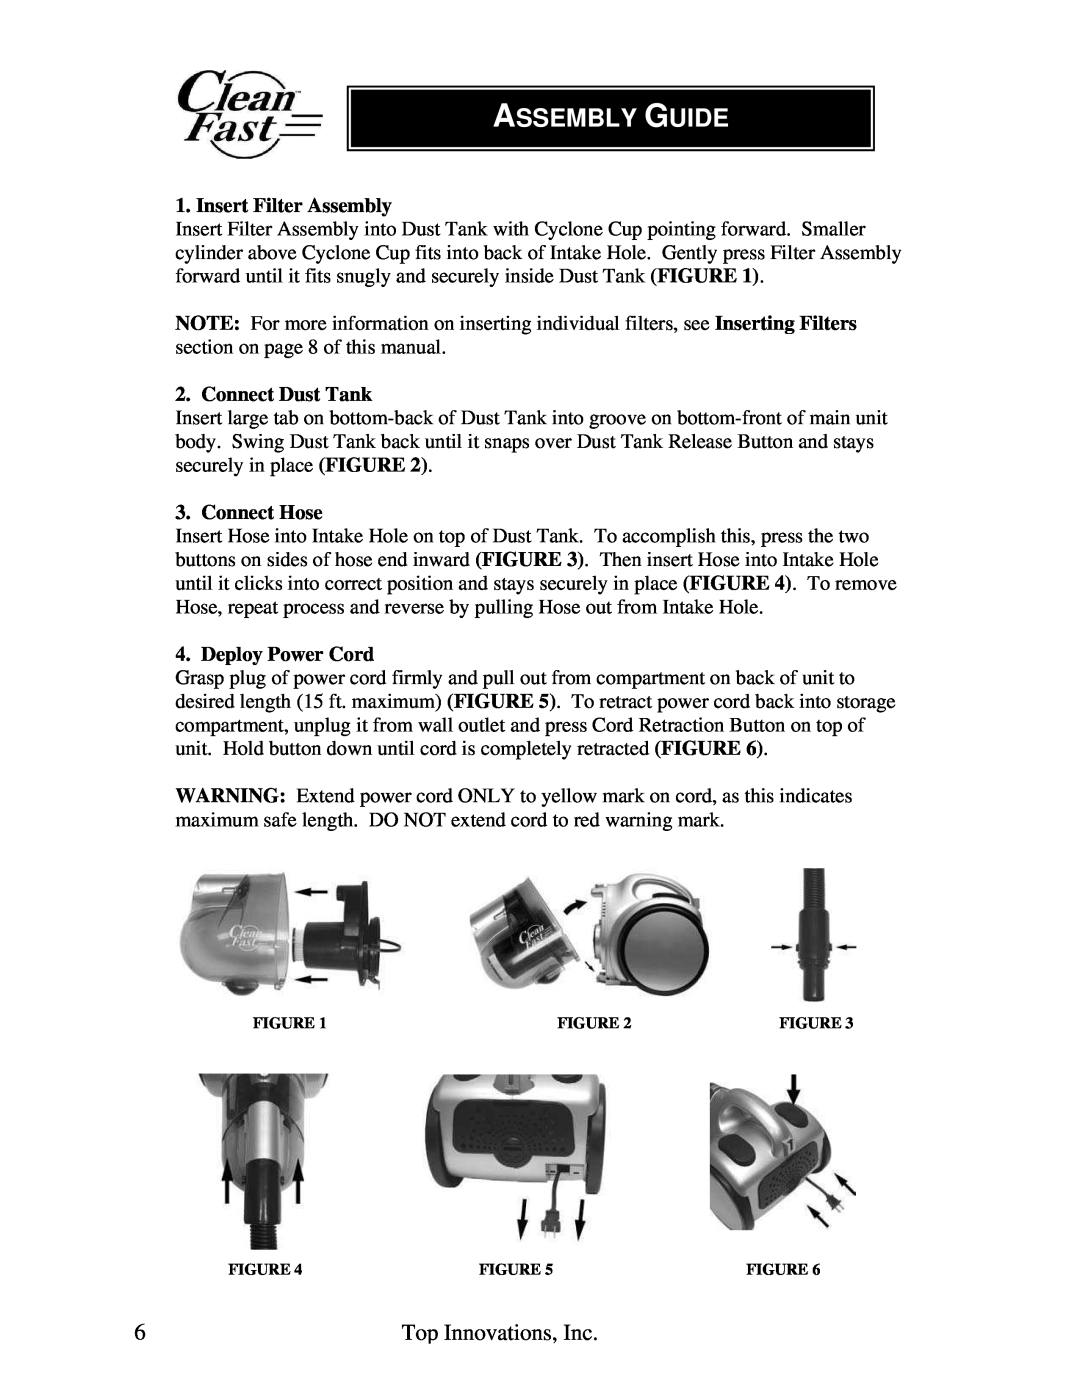 Top Innovations CF-952 warranty Assembly Guide, Insert Filter Assembly, Connect Dust Tank, Connect Hose, Deploy Power Cord 